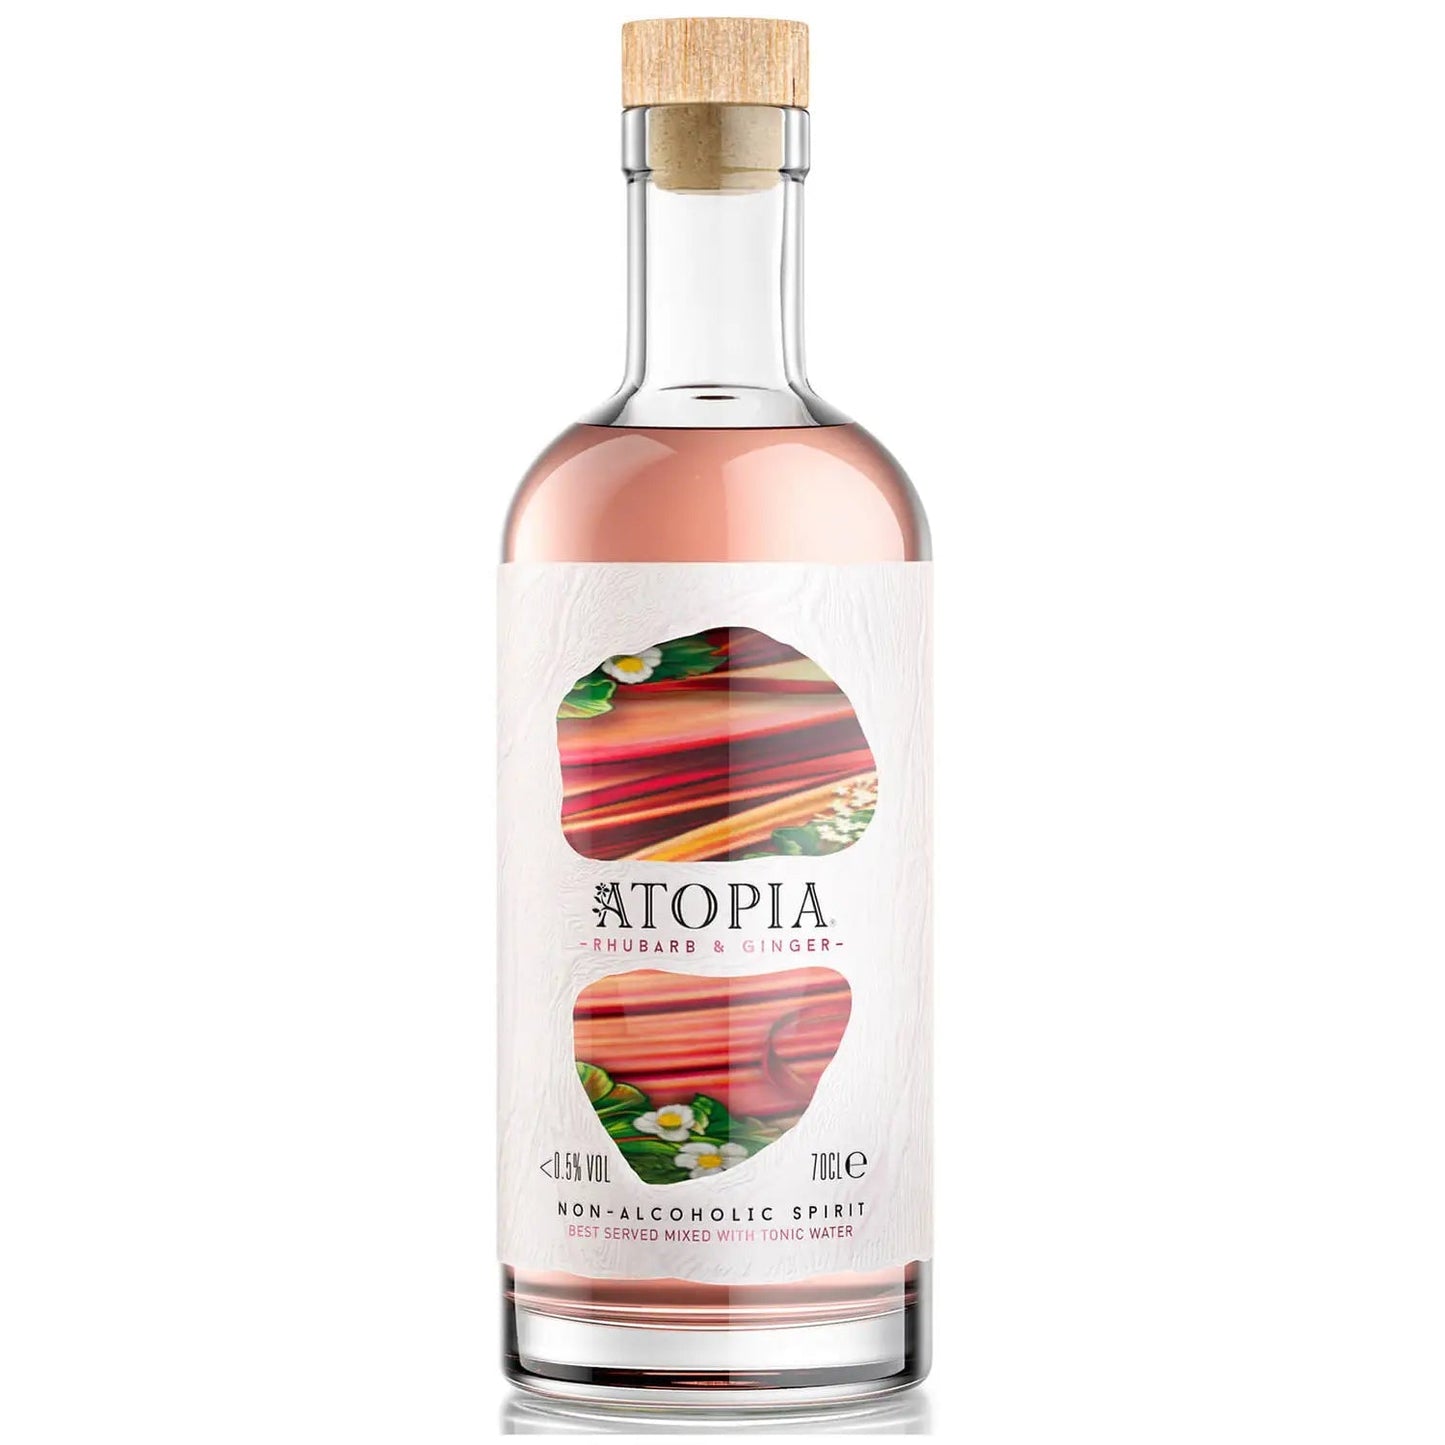 Atopia Rhubarb & Ginger Ultra-Low Alcohol Spirit 0.5%-Gin-5010327655772-Fountainhall Wines